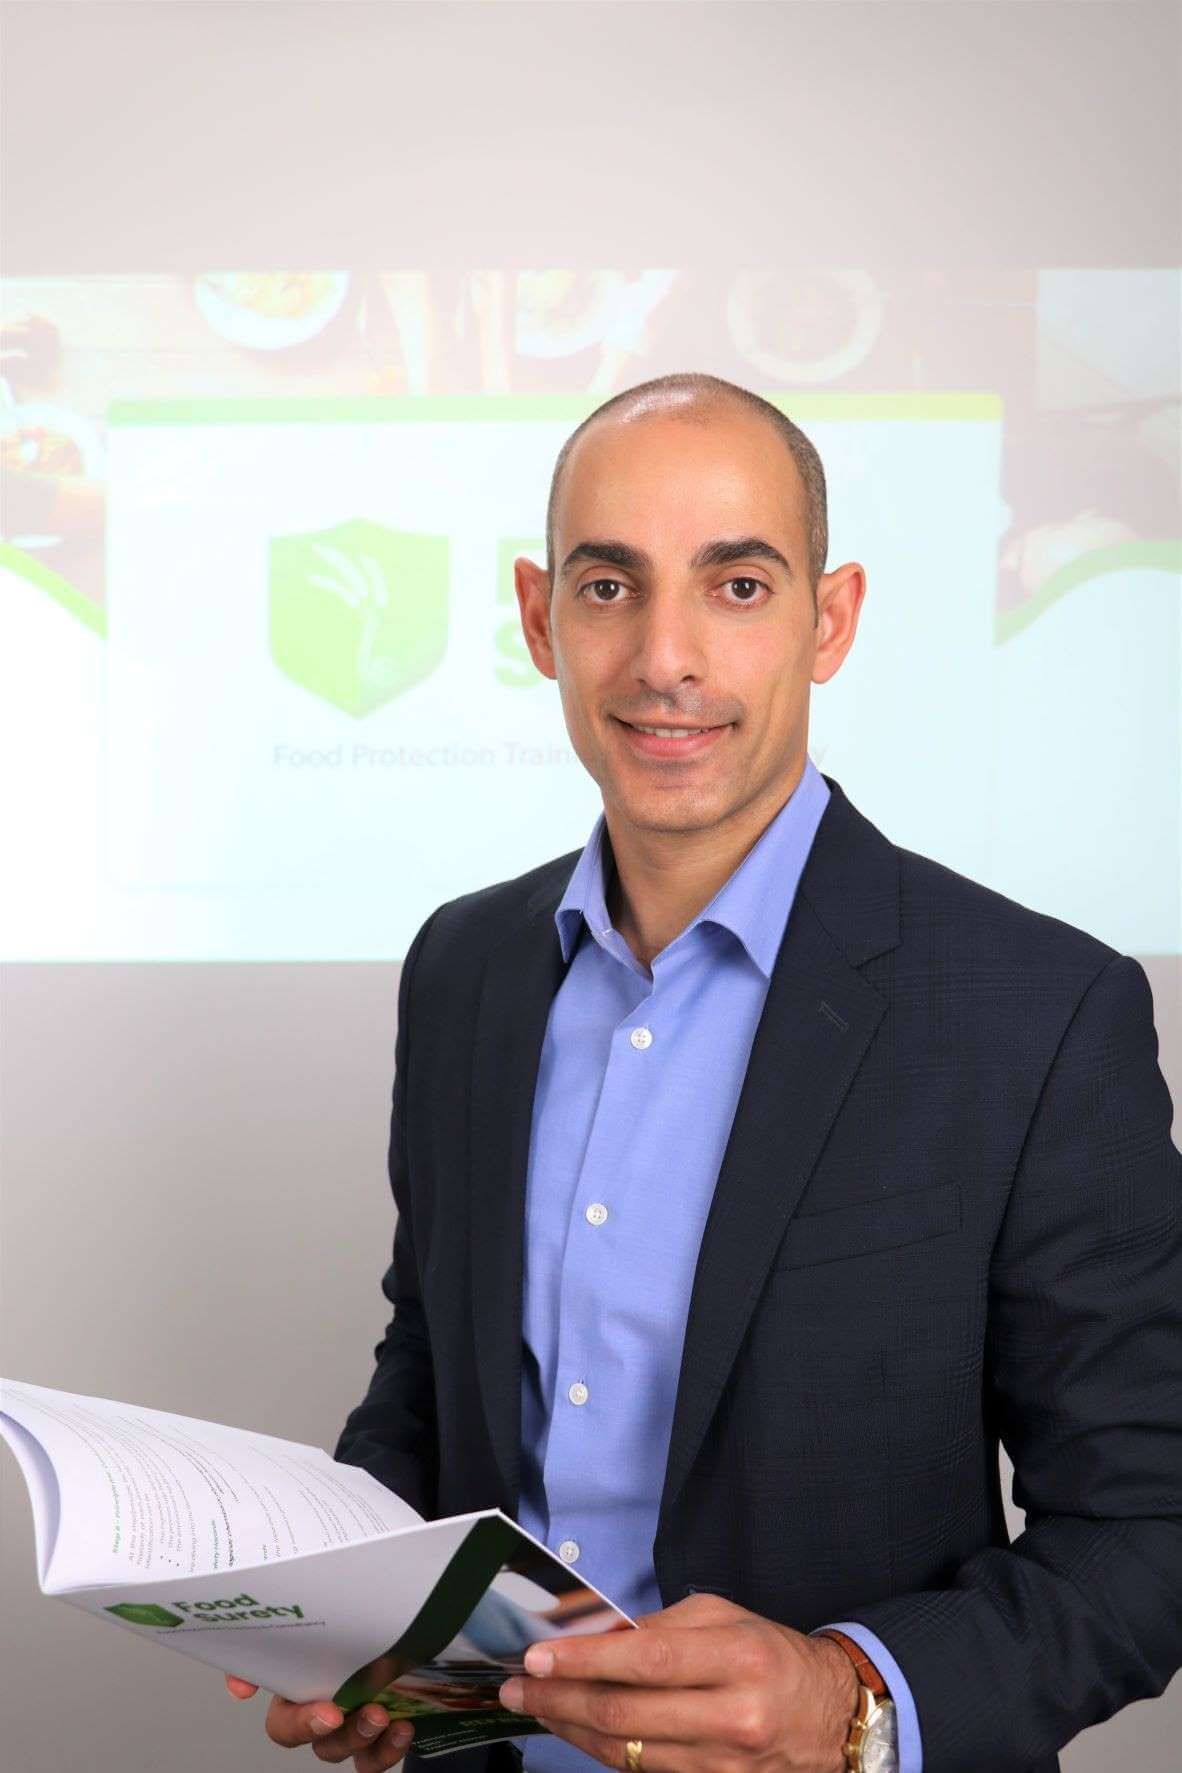 Ray Haddad - Managing director of Food Surety, he is the trainer for food surety's food governance training and safety culture elearning